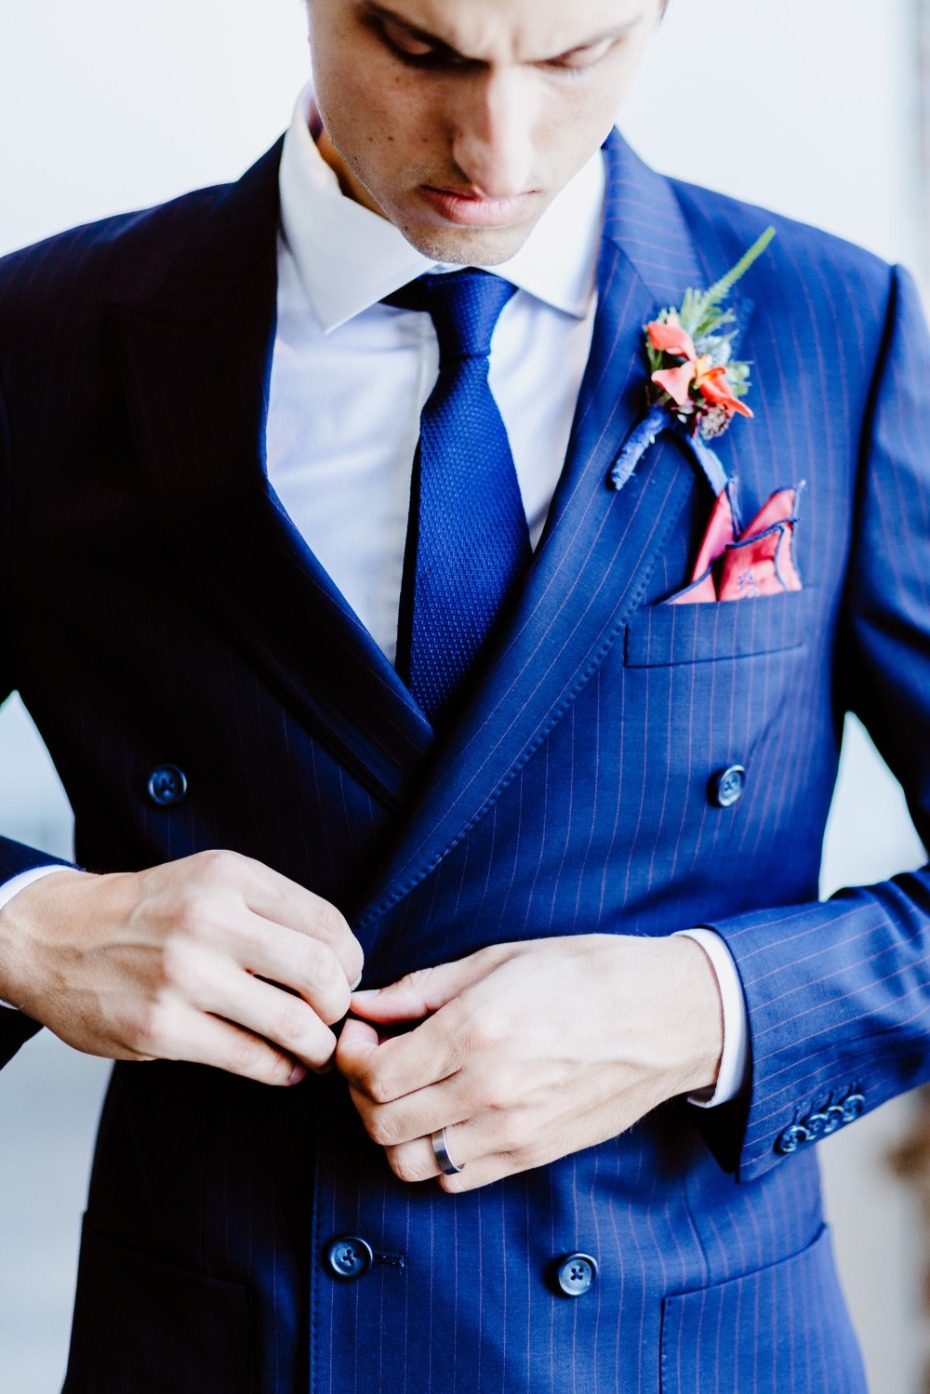 20 Ways to Dress Up Your Groom